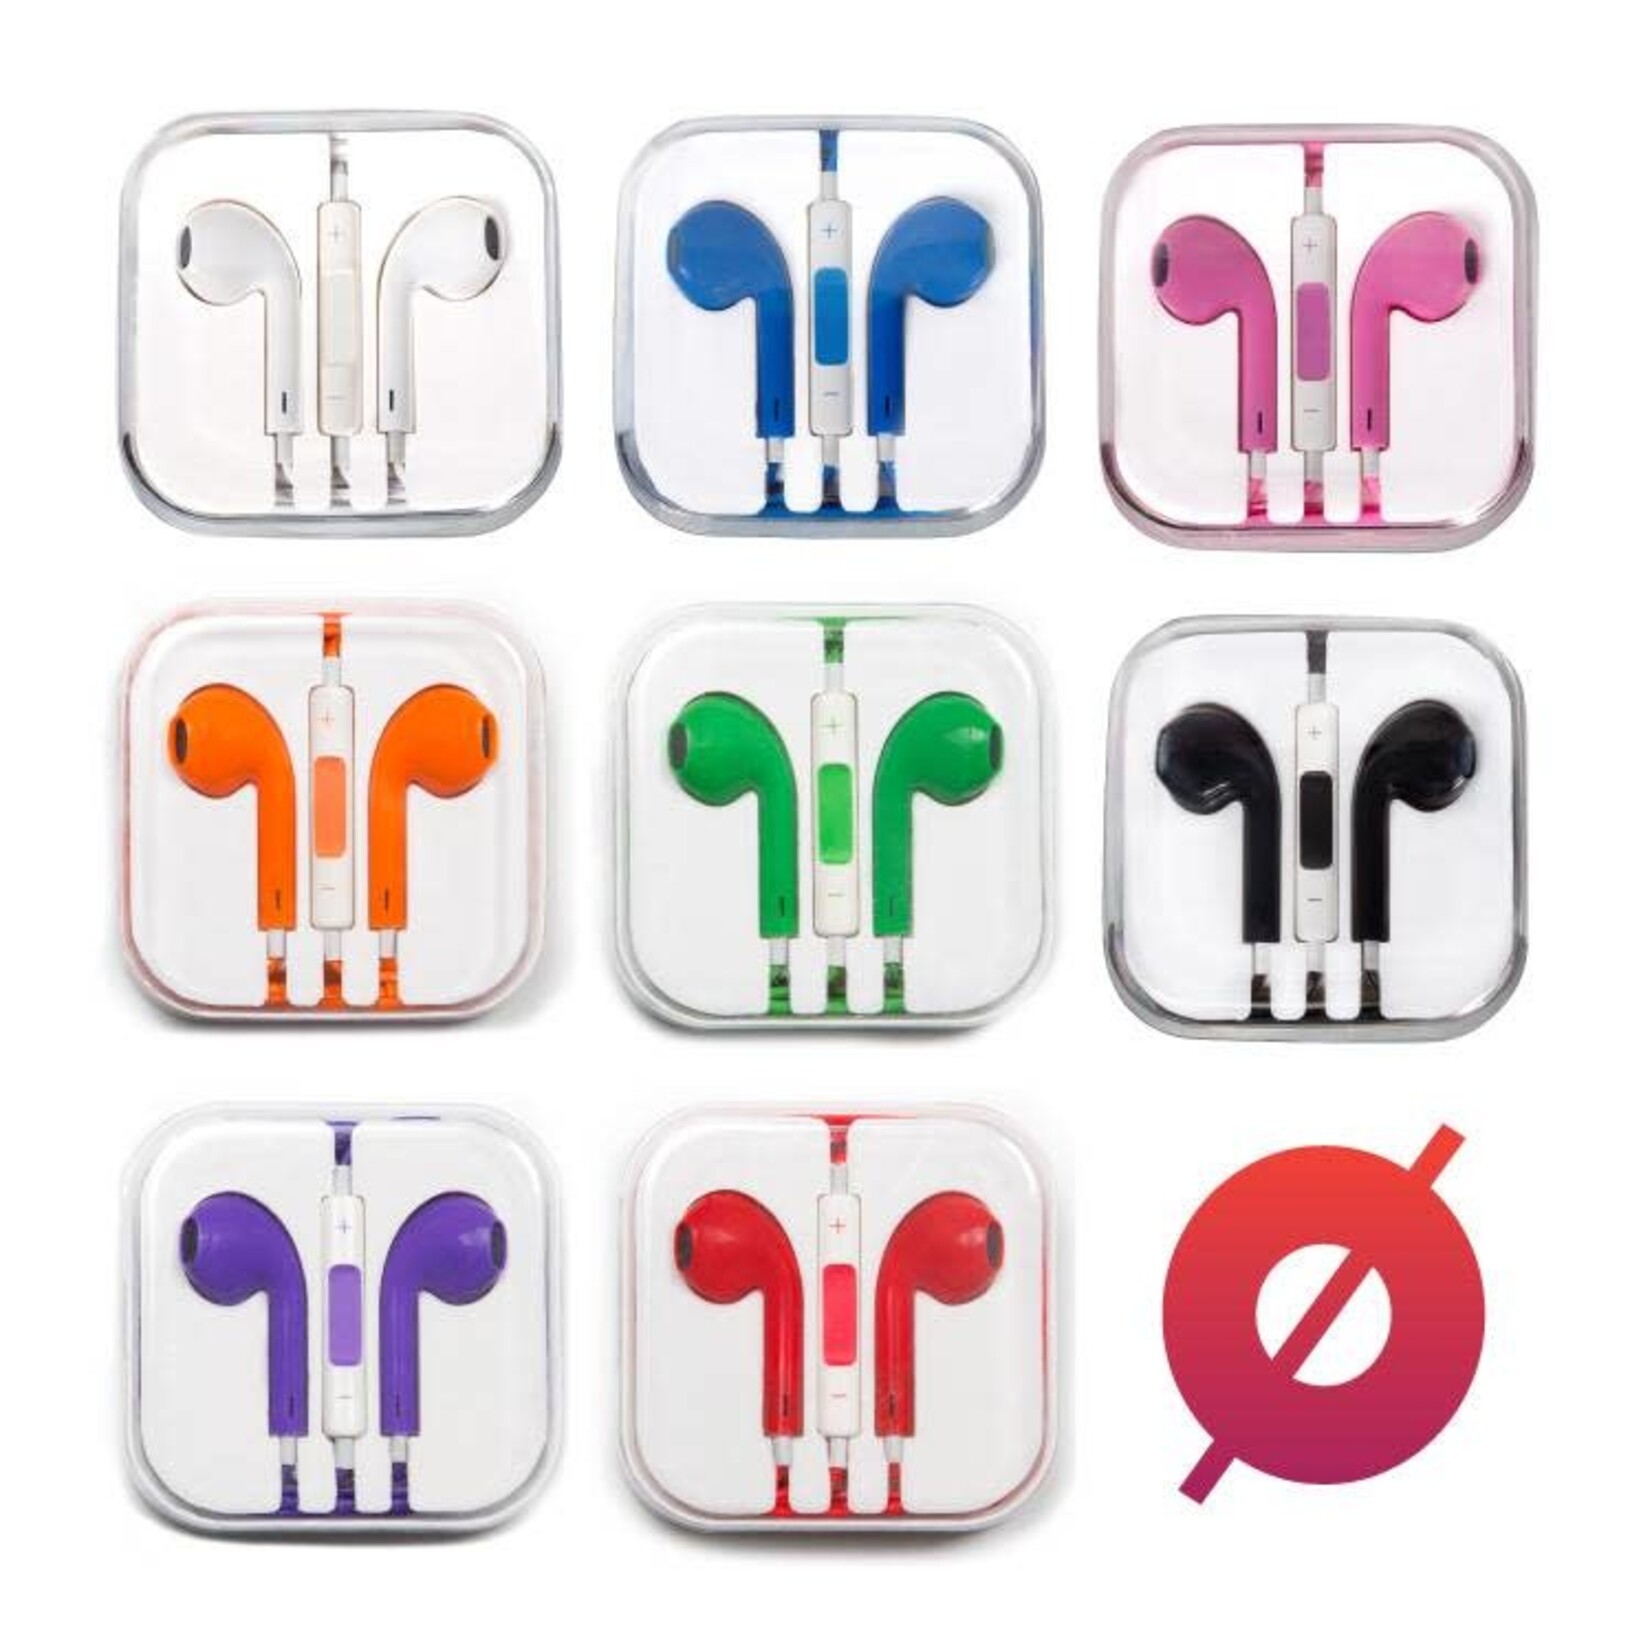 Smash Discount Earbuds W/ Remote & Mic - Green